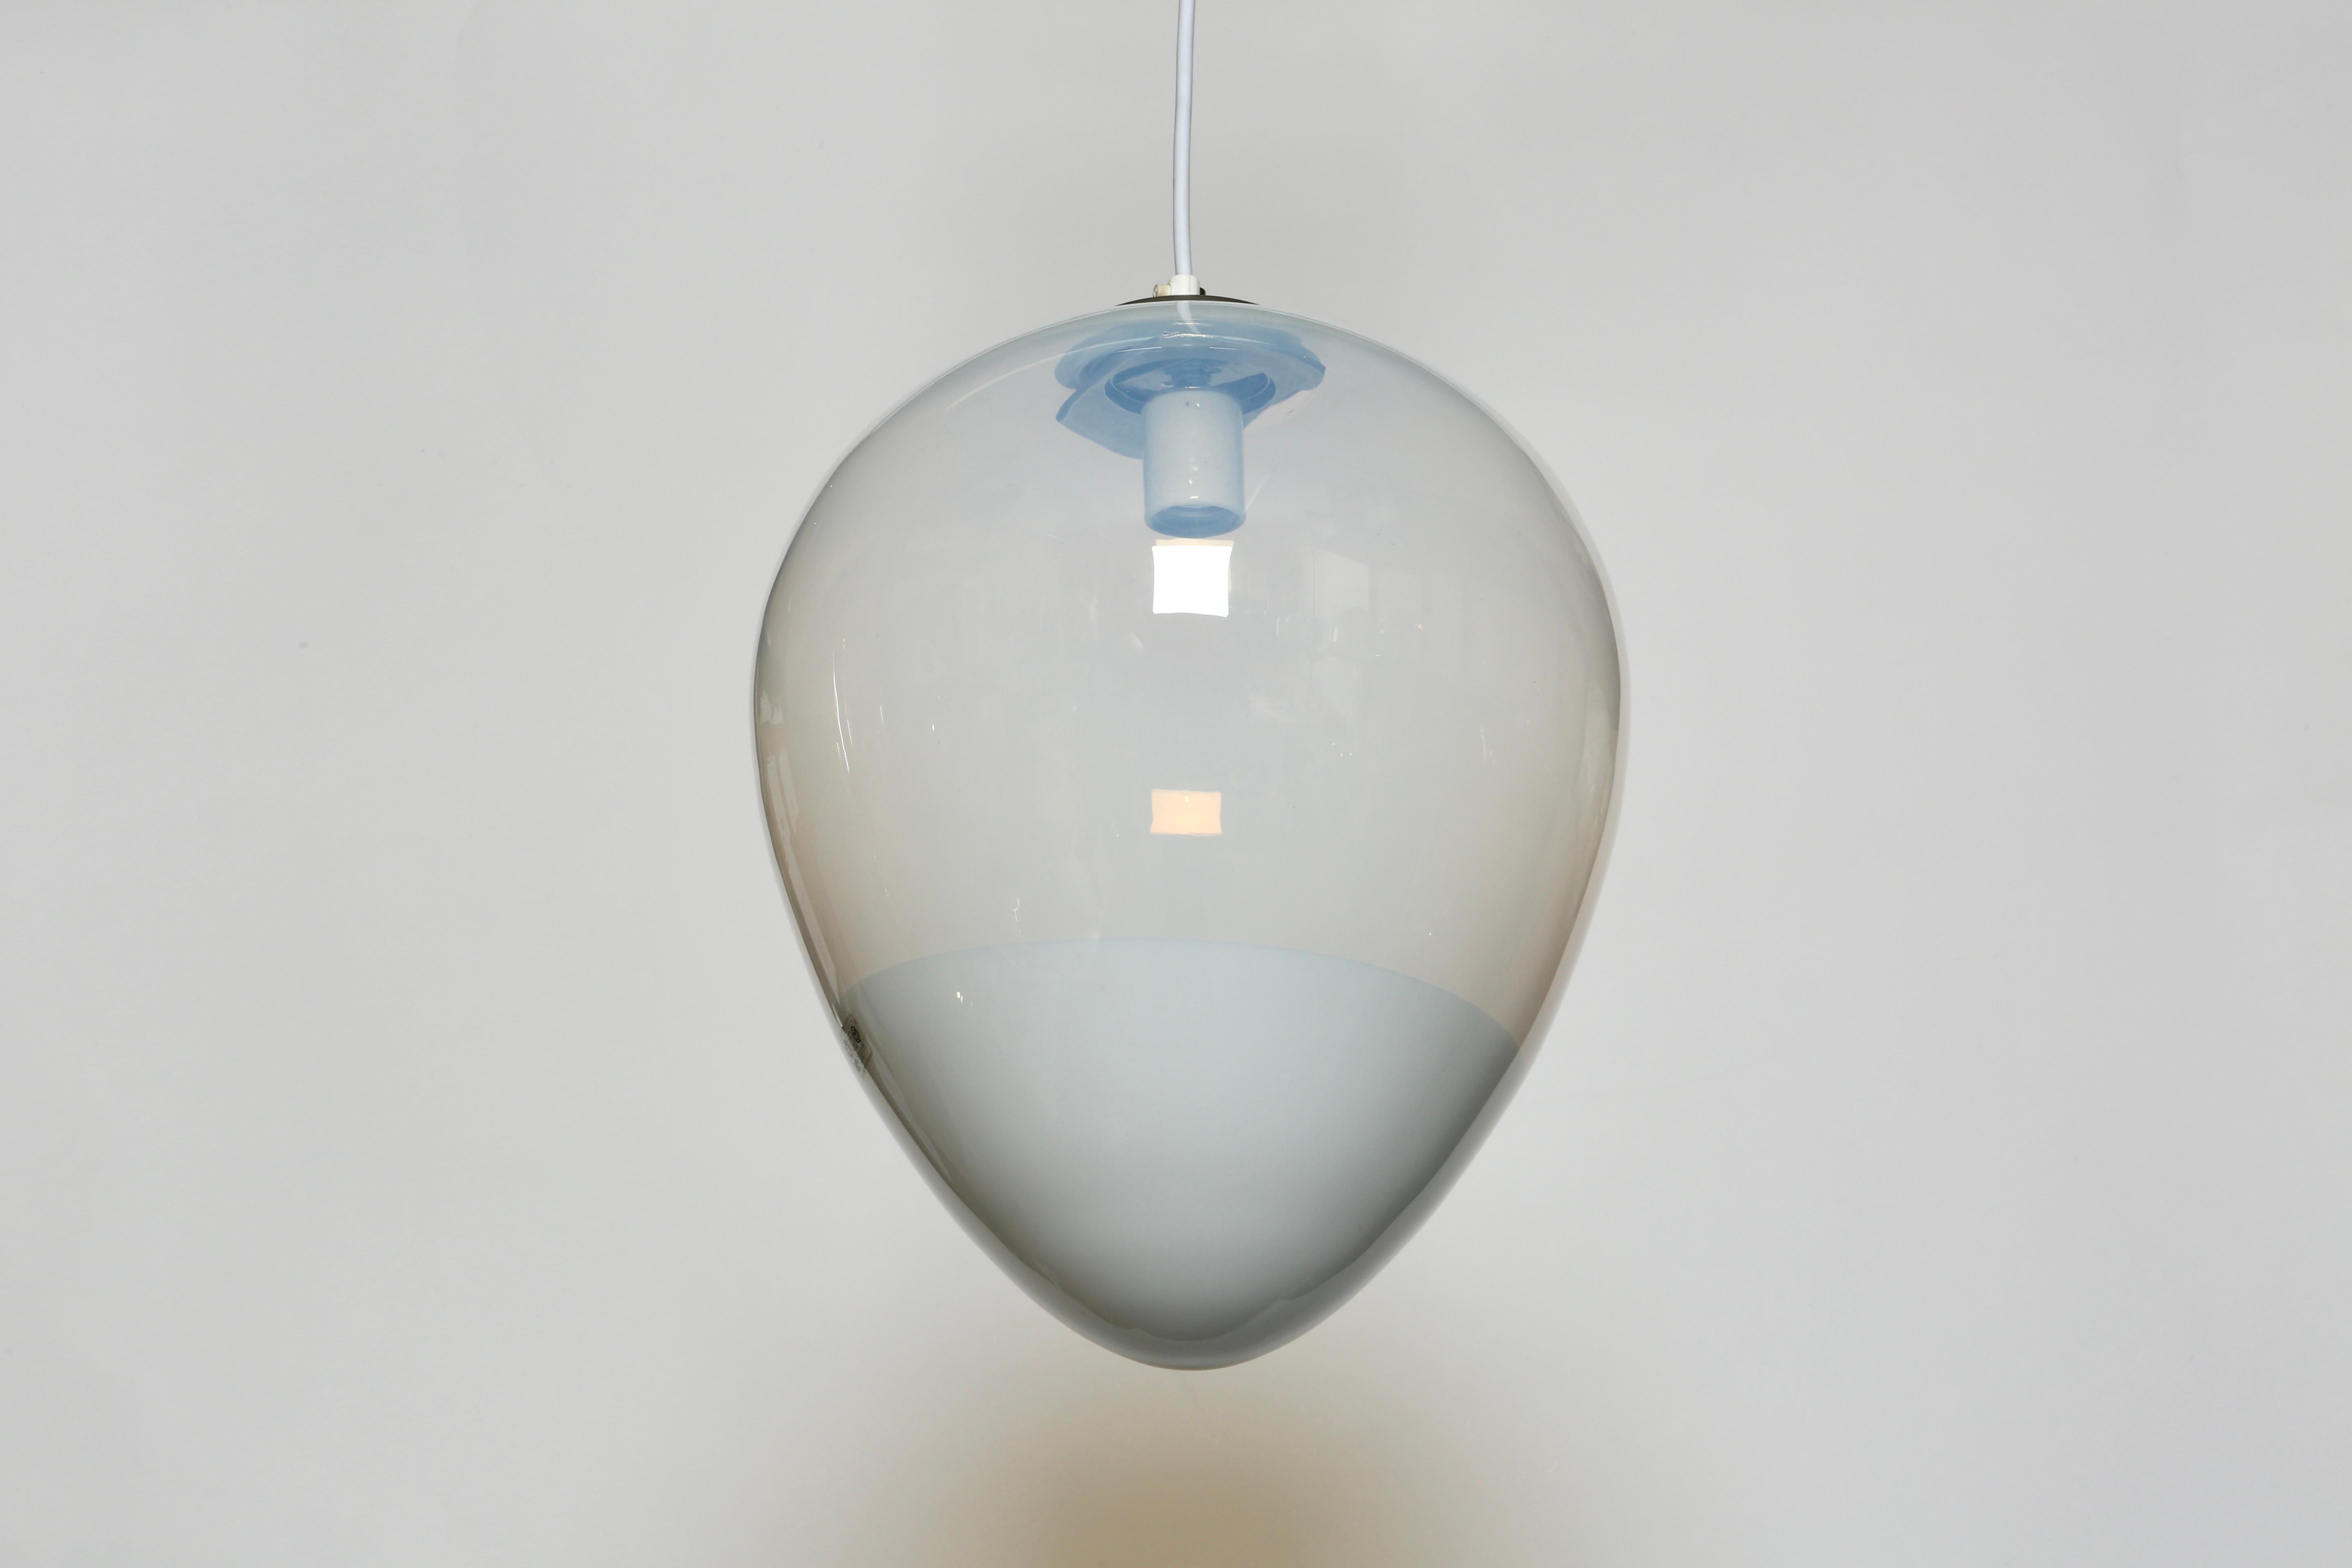 Murano glass ceiling pendant by Leucos.
Made in Italy in 1970s.
Handblown glass.
Rewired for US.
Takes one medium base bulb.
Overall drop is adjustable, can be shorter.
1 ceiling pendant is available.
Price is for 1 pendant.

At Illustris Lighting